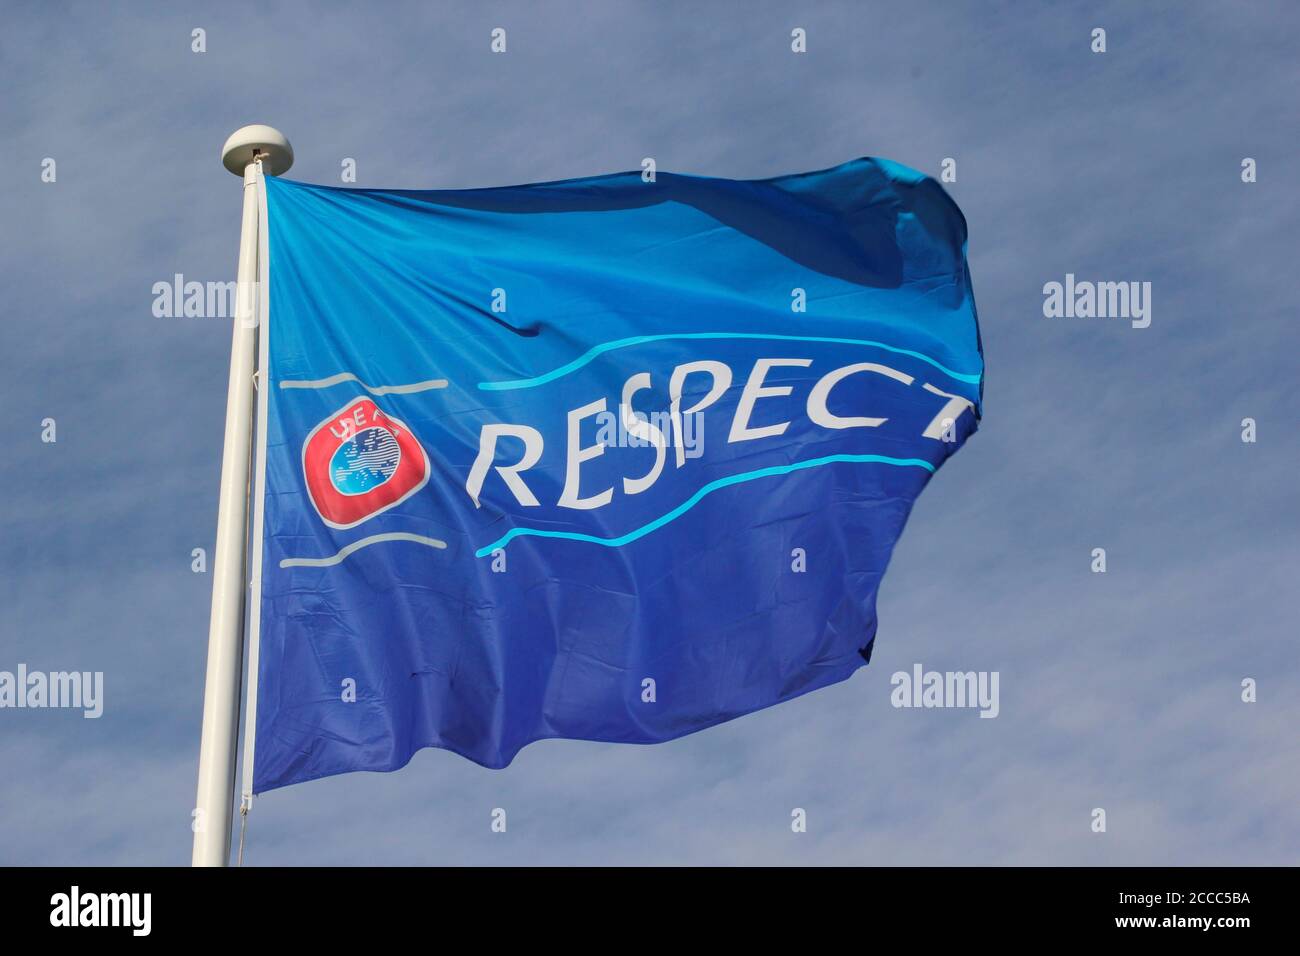 UEFA Respect campaign against racism and to promote working towards unity and respect across gender, race, religion and ability Photo by Tony Henshaw Stock Photo